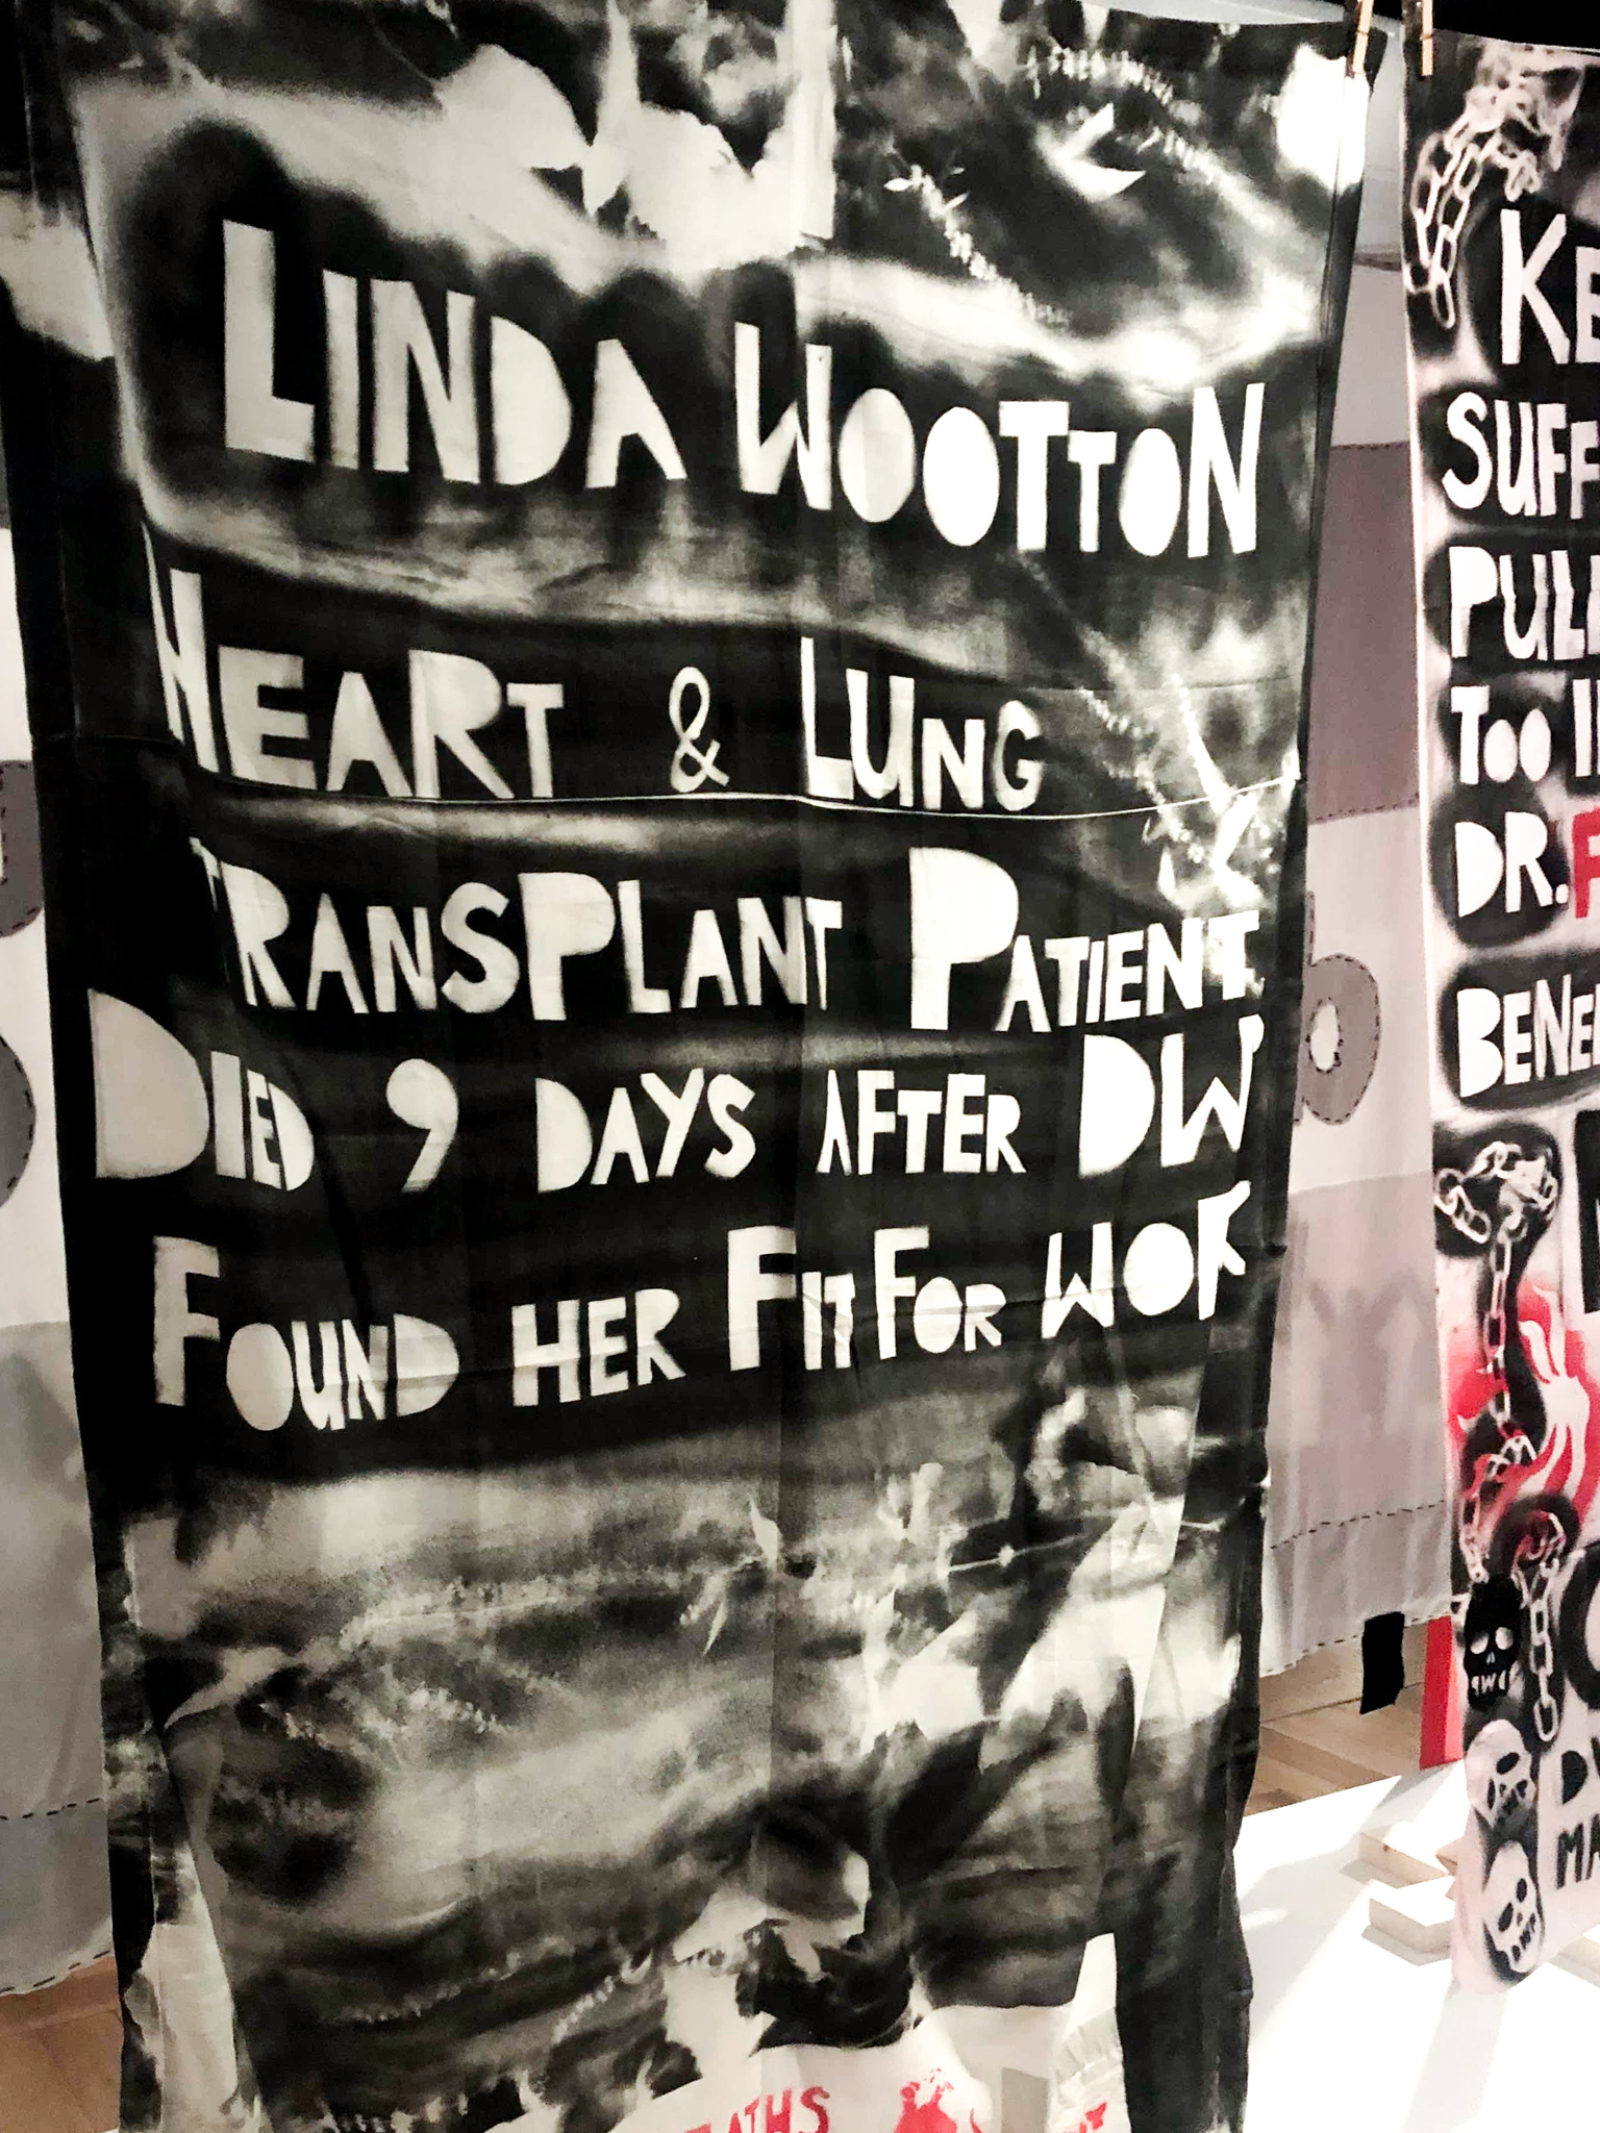 A black and white hand made tapestry reading 'Linda Wooton Heart & Lung transplant patient died 9 days after DWP found her fit for work'.